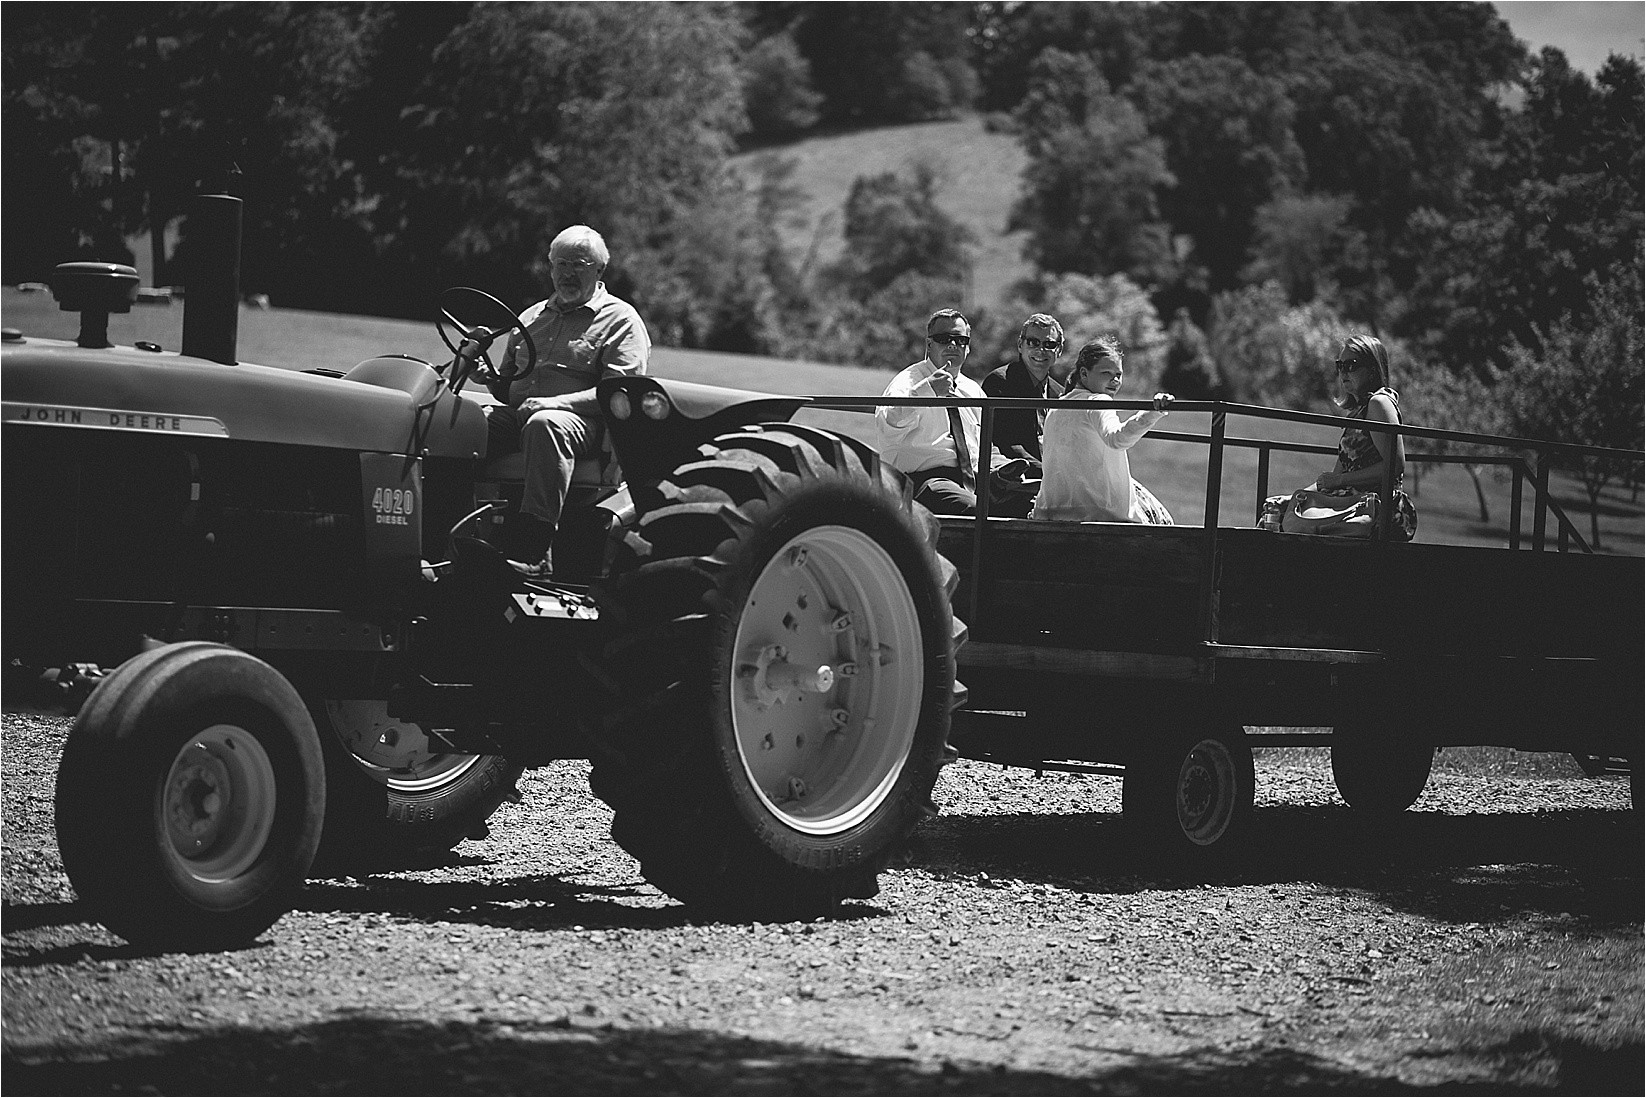 Pulling people on the tractor at Caroline and Evans mountain wedding at yesterday spaces in asheville leicester north caroline